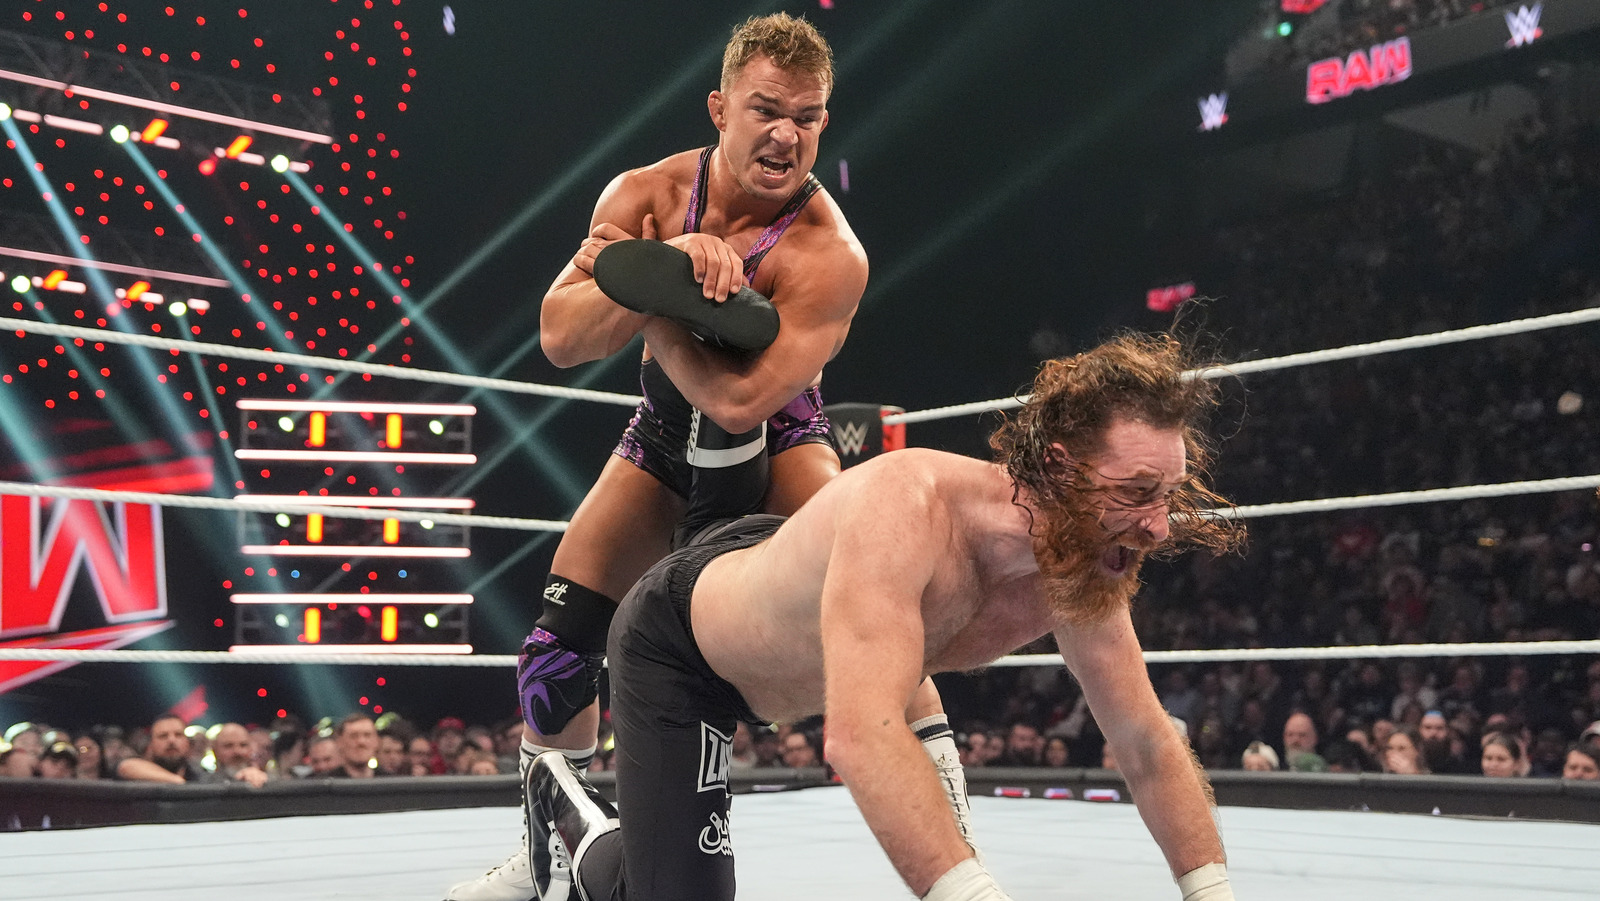 Chad Gable Goes Off After Another WWE Raw Attack On Sami Zayn